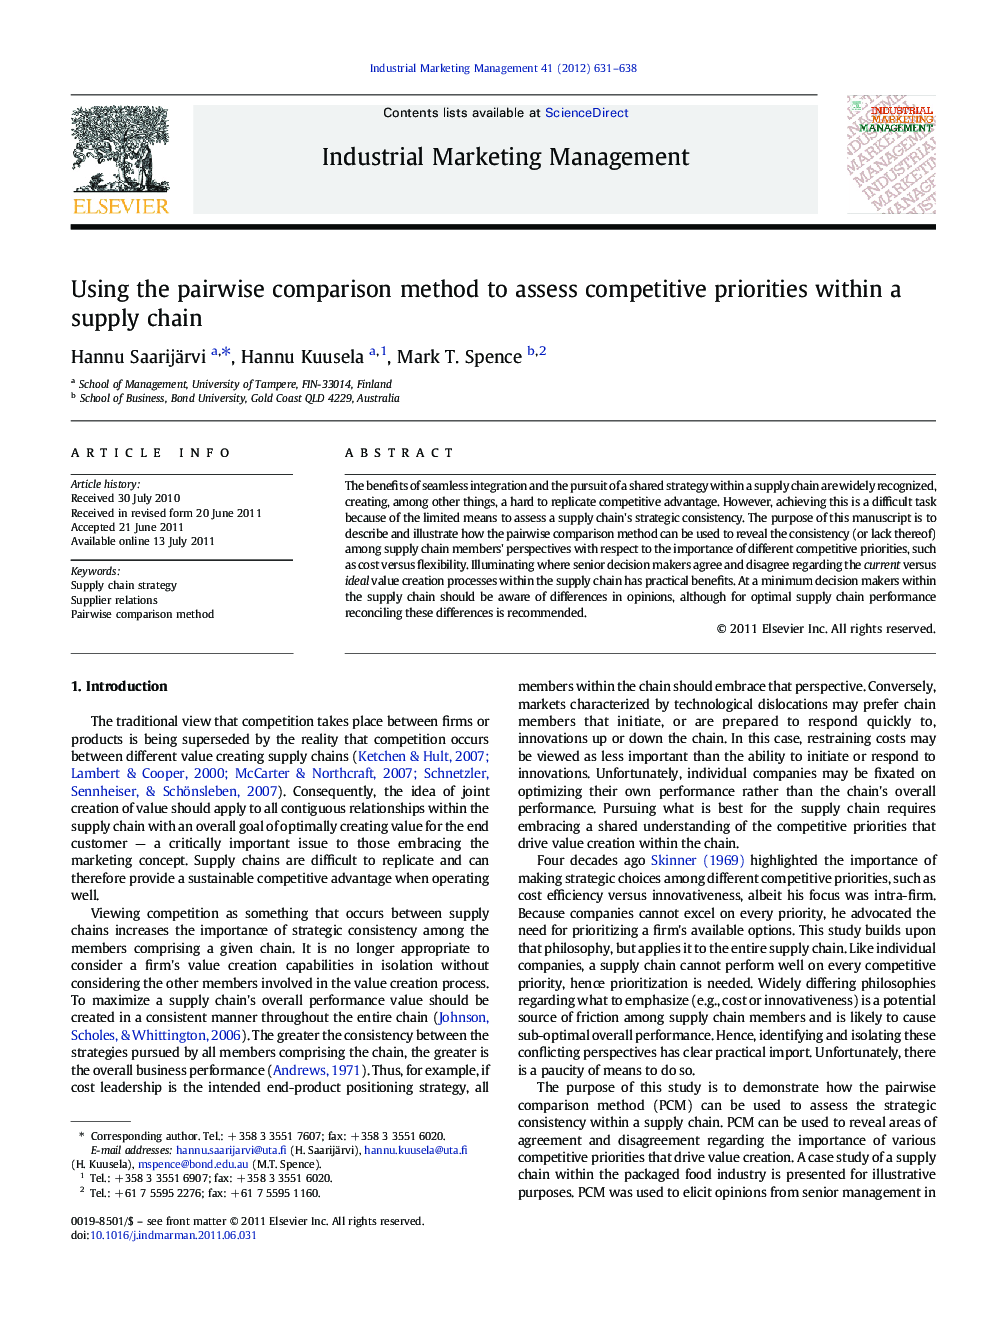 Using the pairwise comparison method to assess competitive priorities within a supply chain